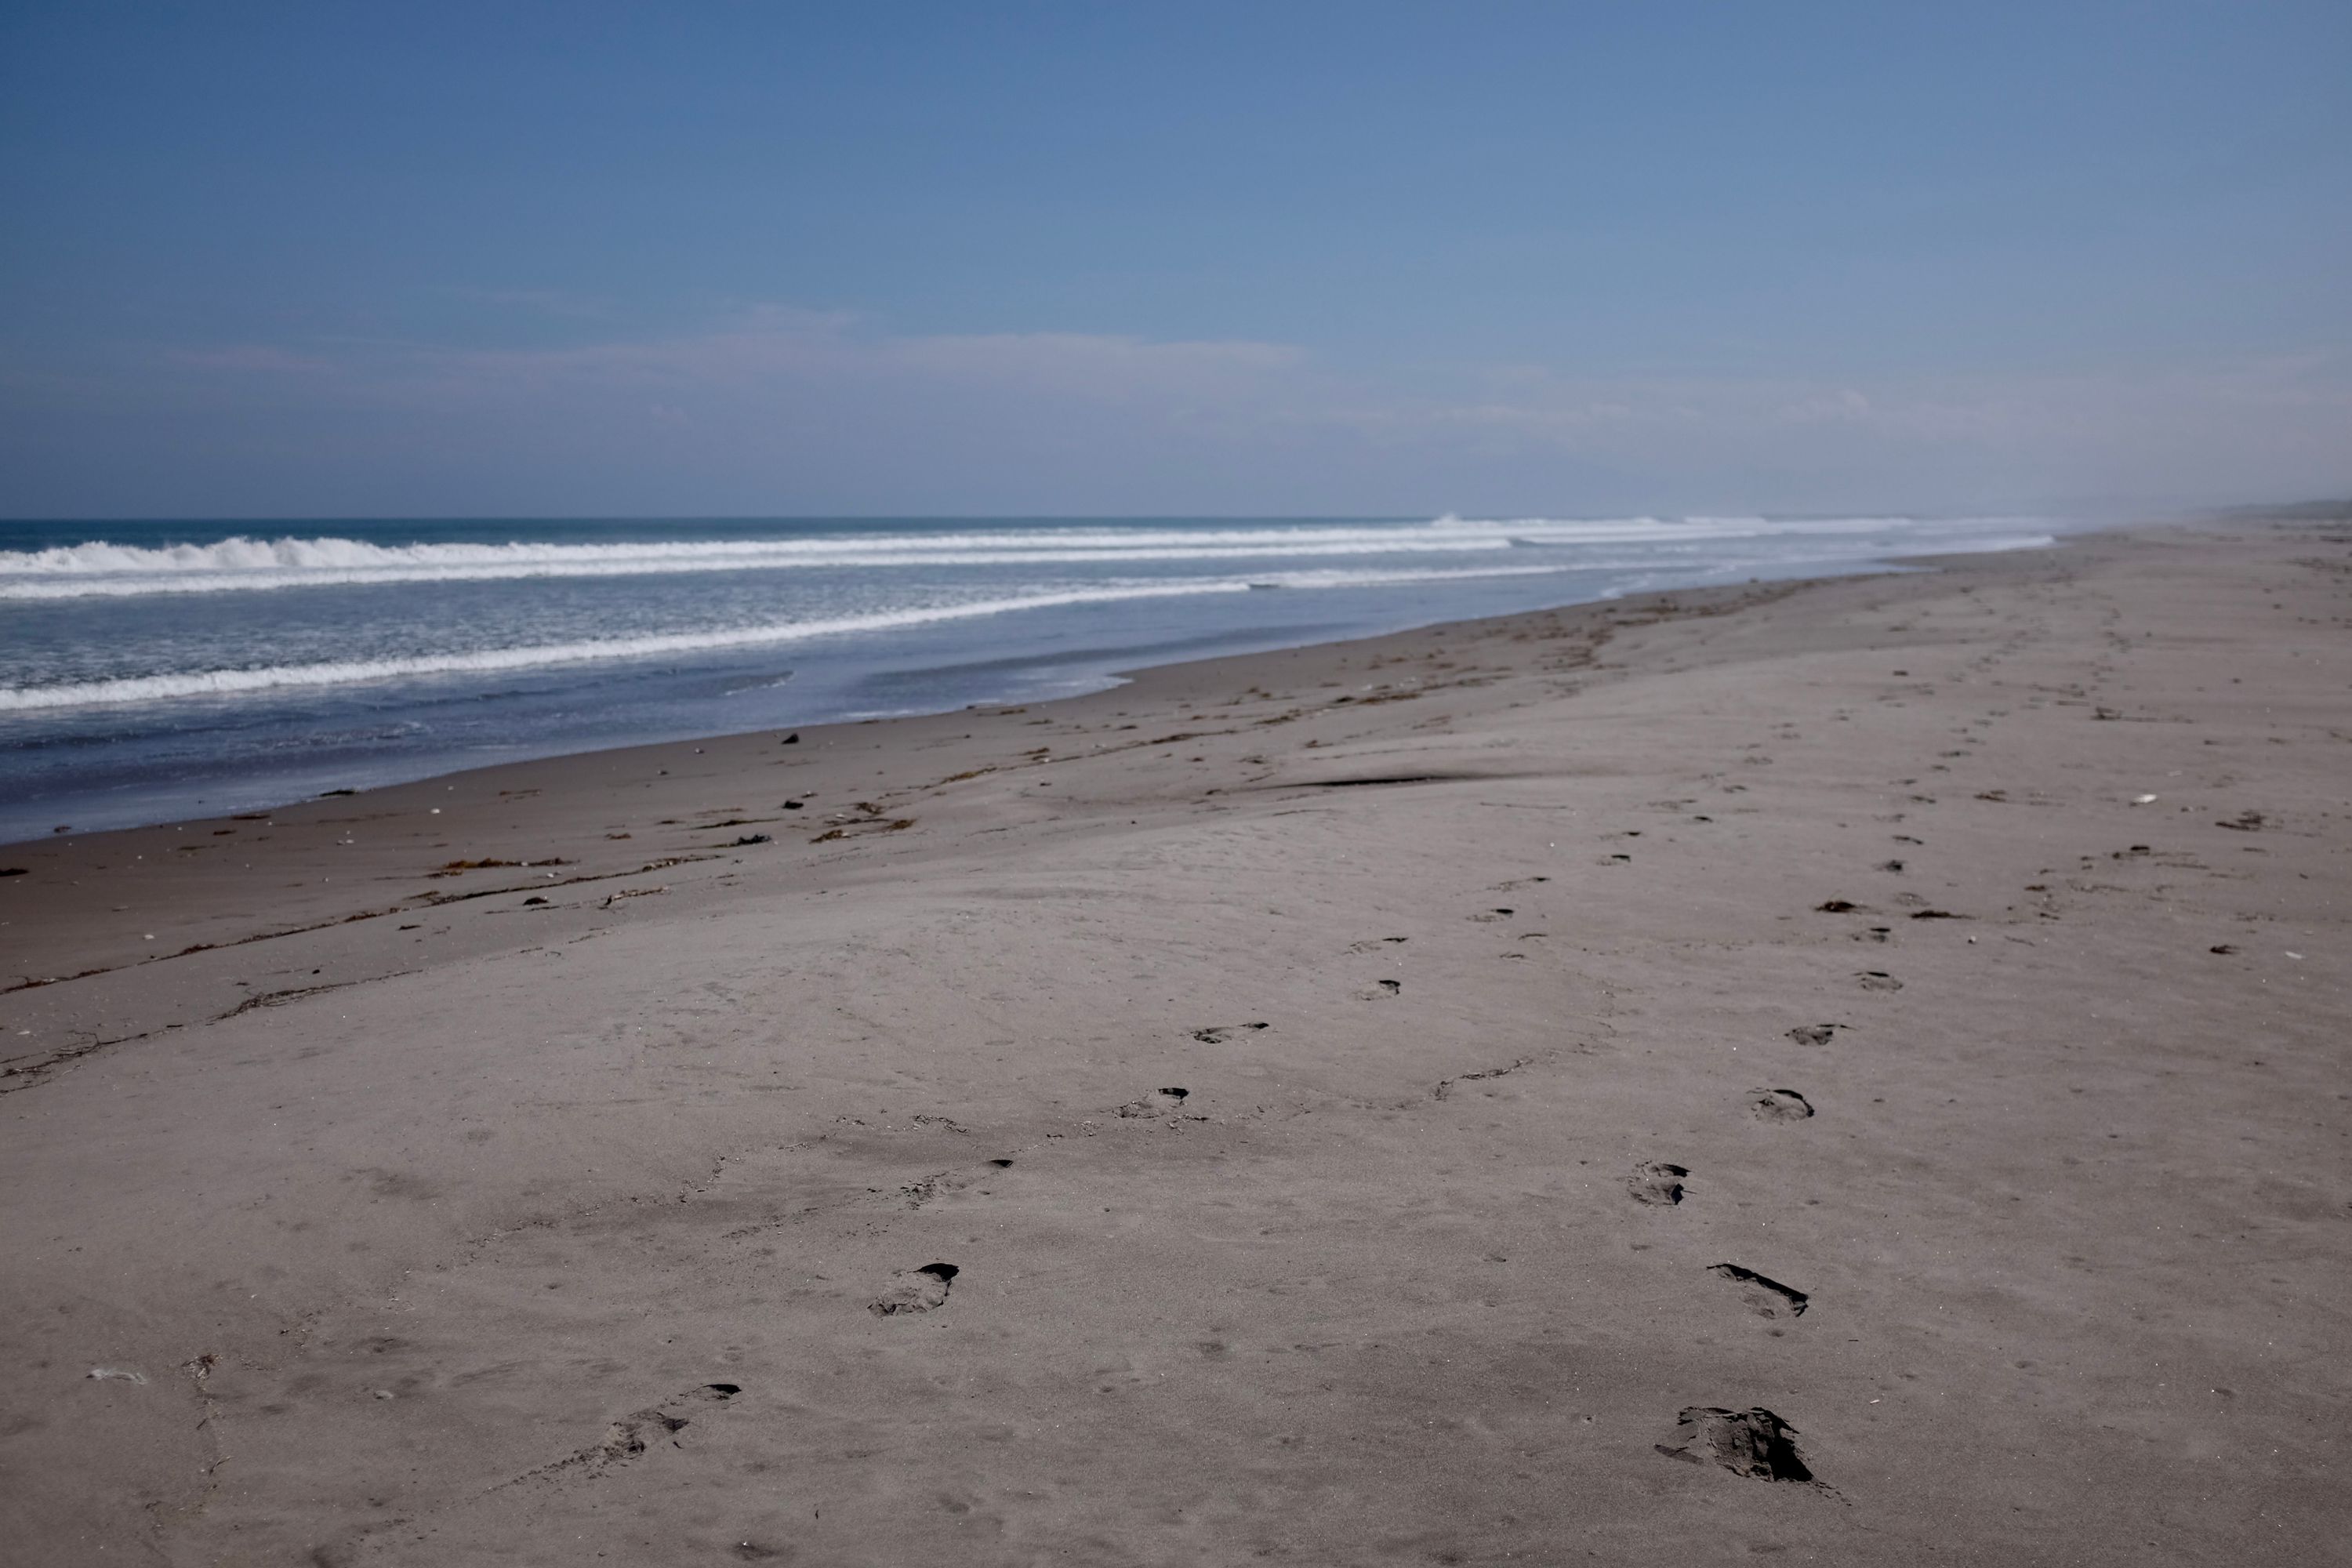 Looking back on the beach, two pairs of footprints recede into the distance.